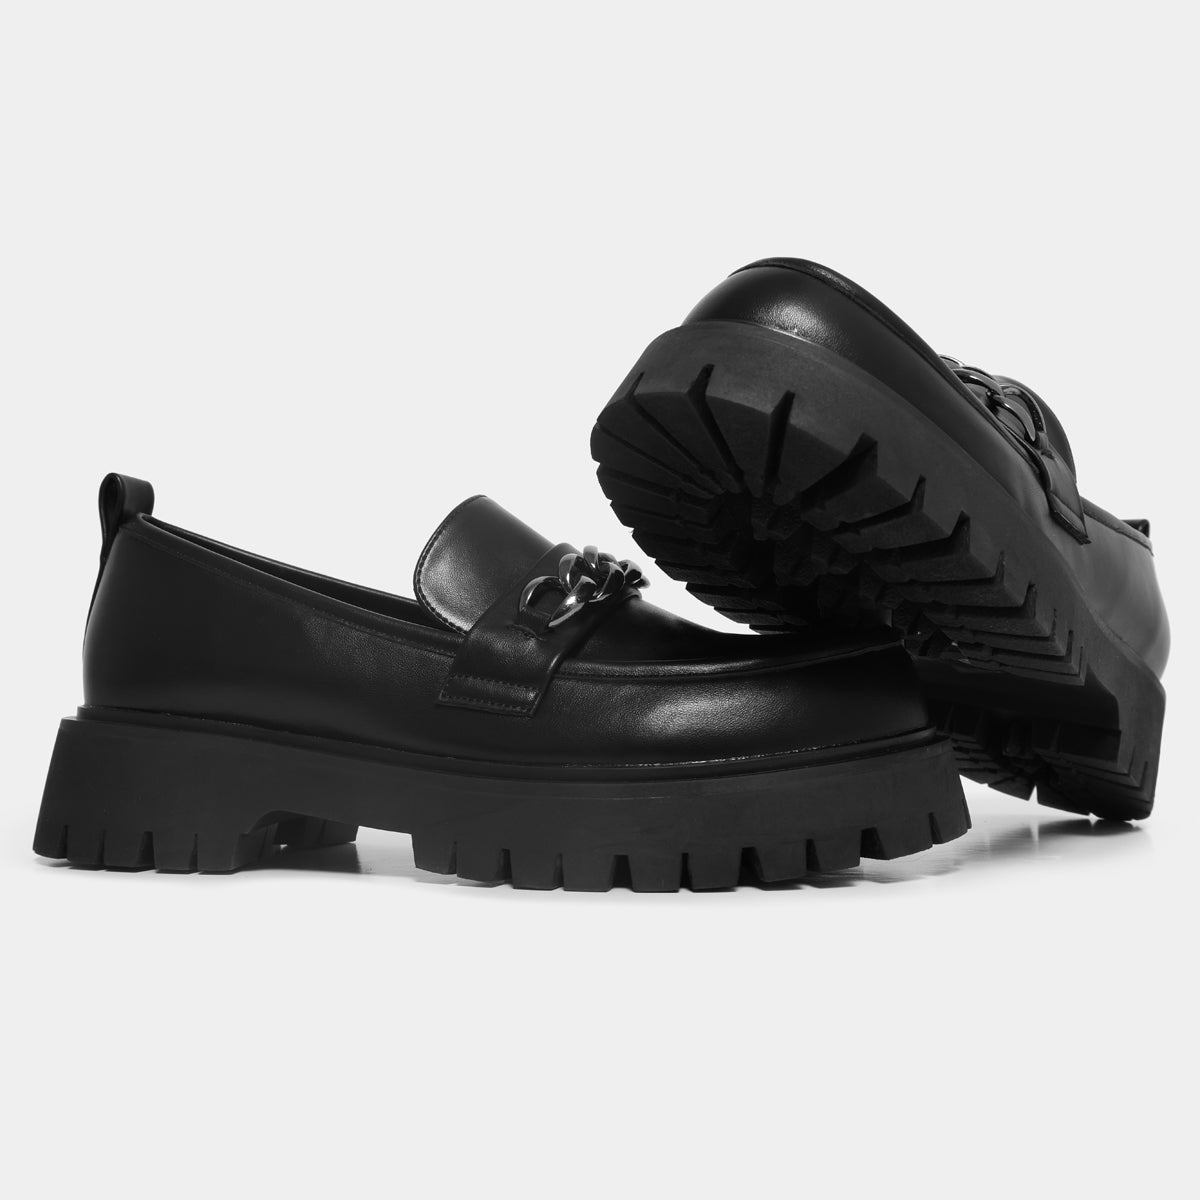 Shenron Men's Chain Black Loafers - Shoes - KOI Footwear - Black - Side and Sole View